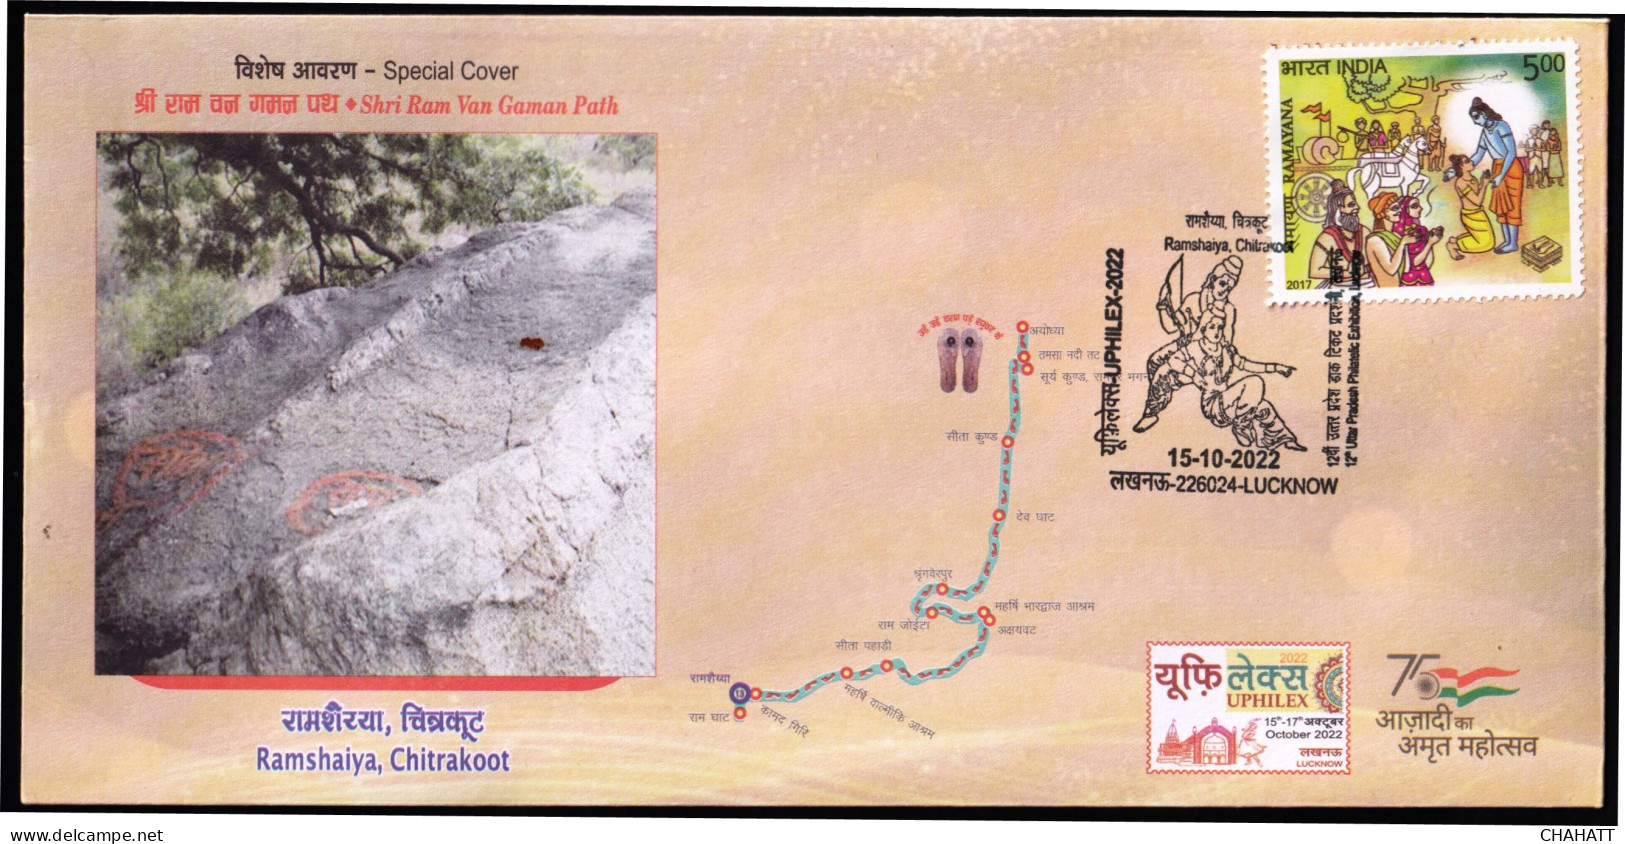 HINDUISM - RAMAYAN -CHITRAKOOT - ARCHERY - PICTORIAL CANCELLATION - SPECIAL COVER - INDIA -2022- BX4-23 - Hinduism